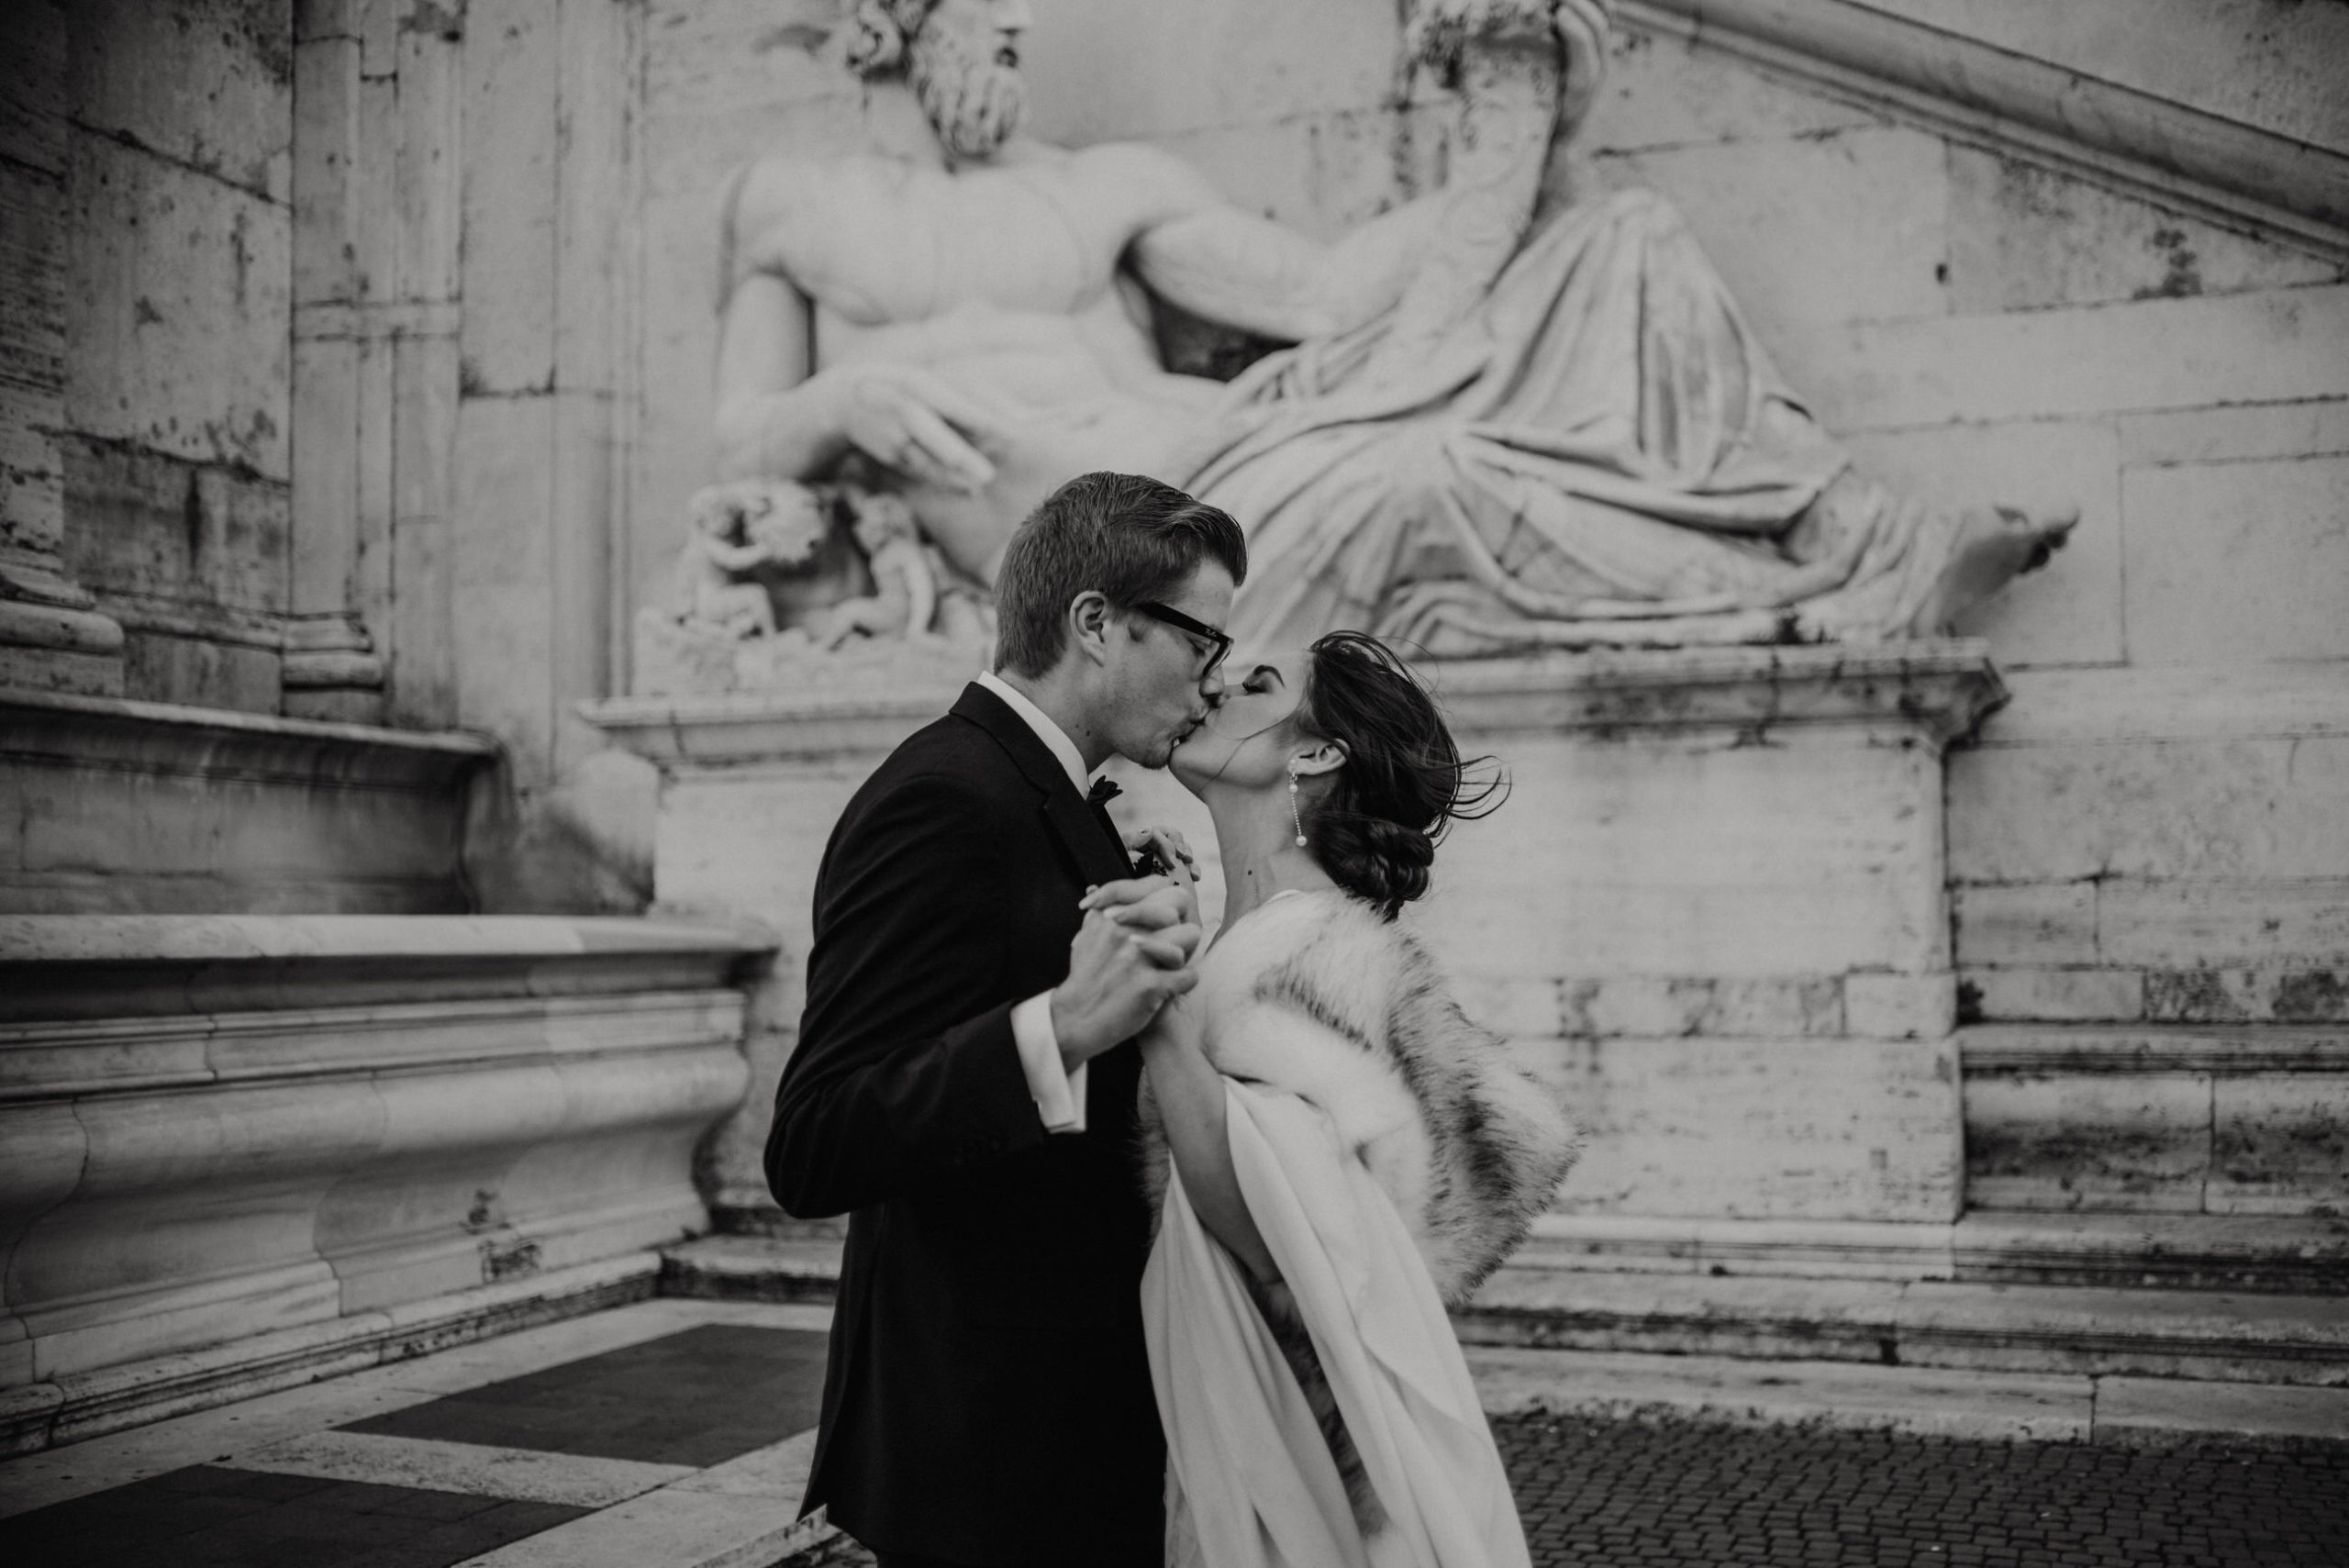 Winter elopement in Rome, Italy - couple from USA